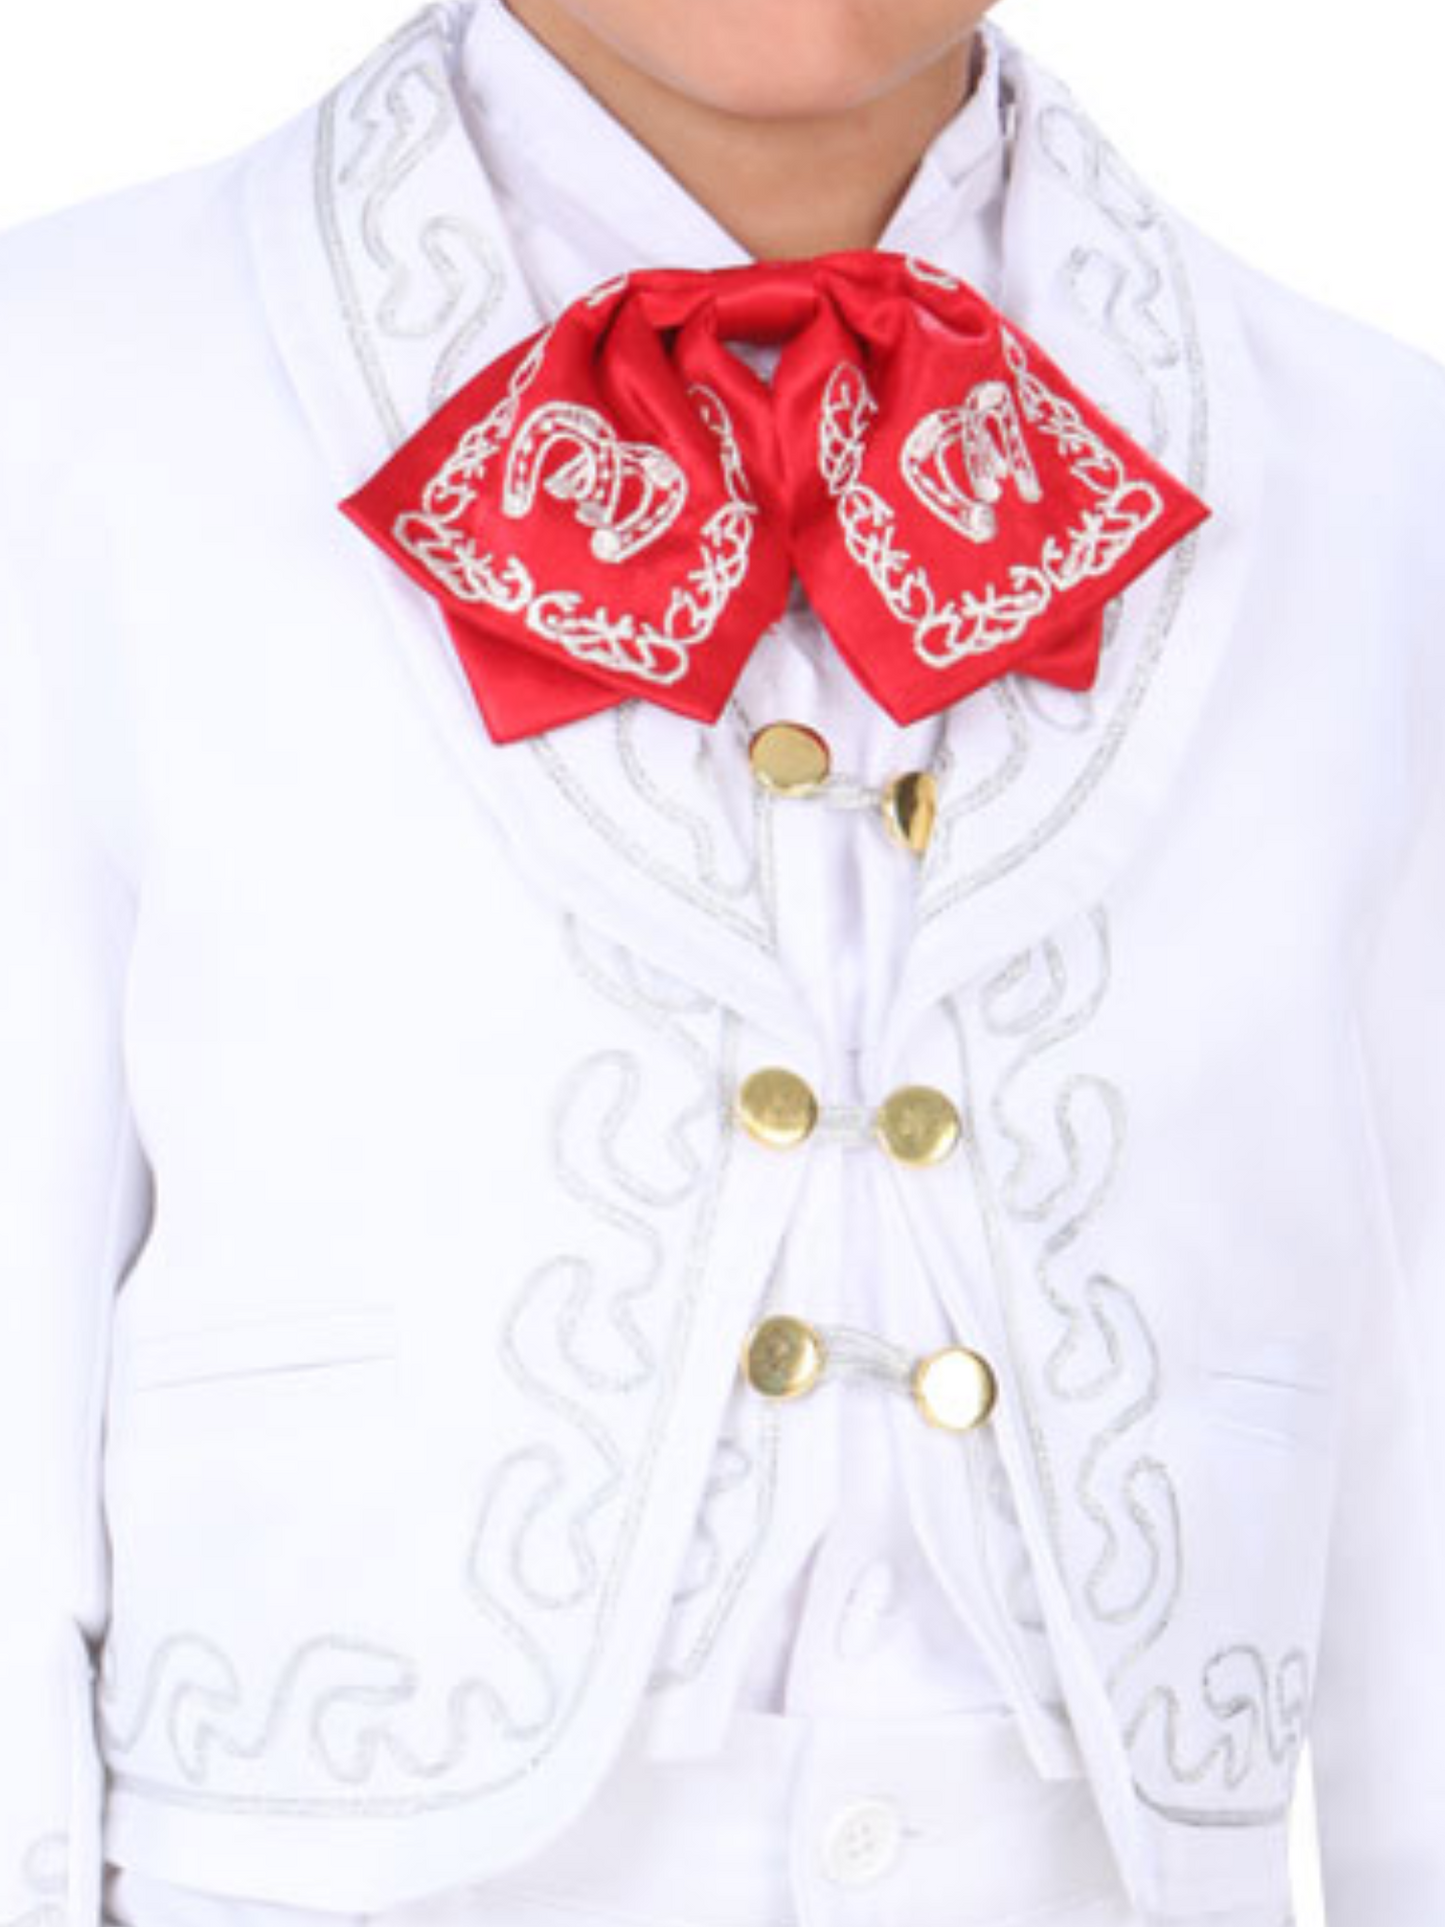 White / White / Red Embroidered Charro Suit for Children 'El General' - ID: 34263